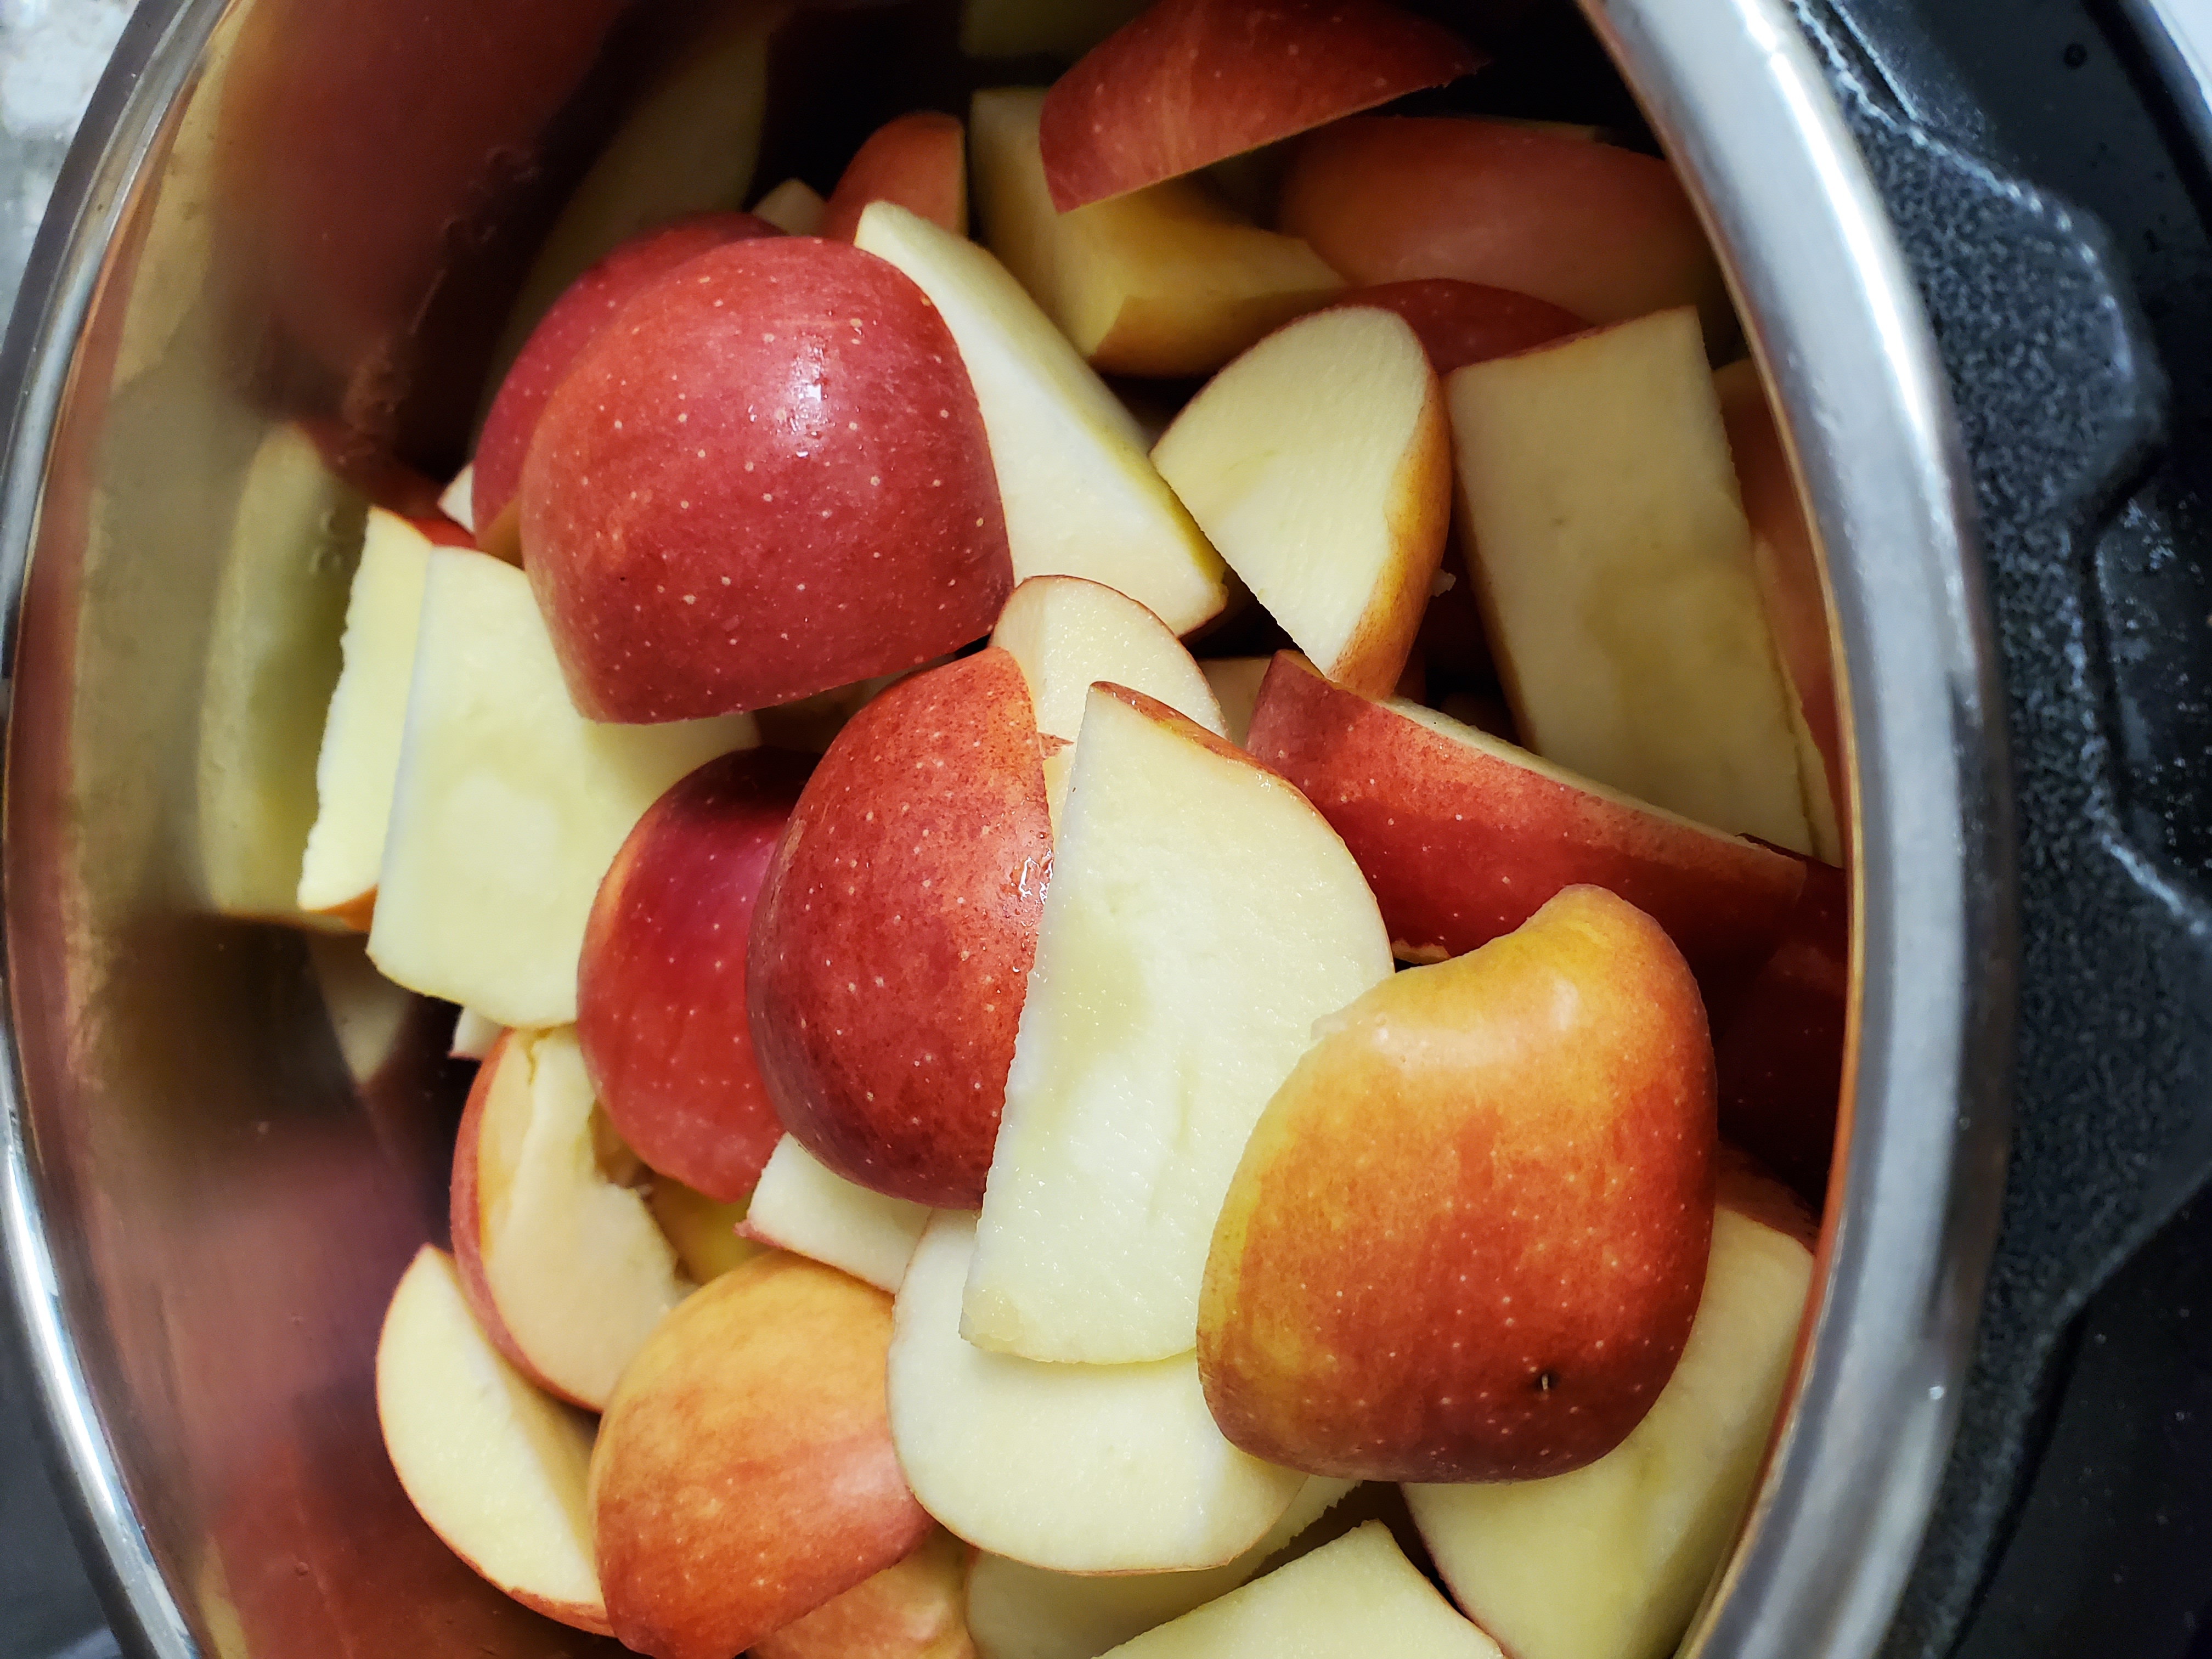 Instant Pot full of apples to cook